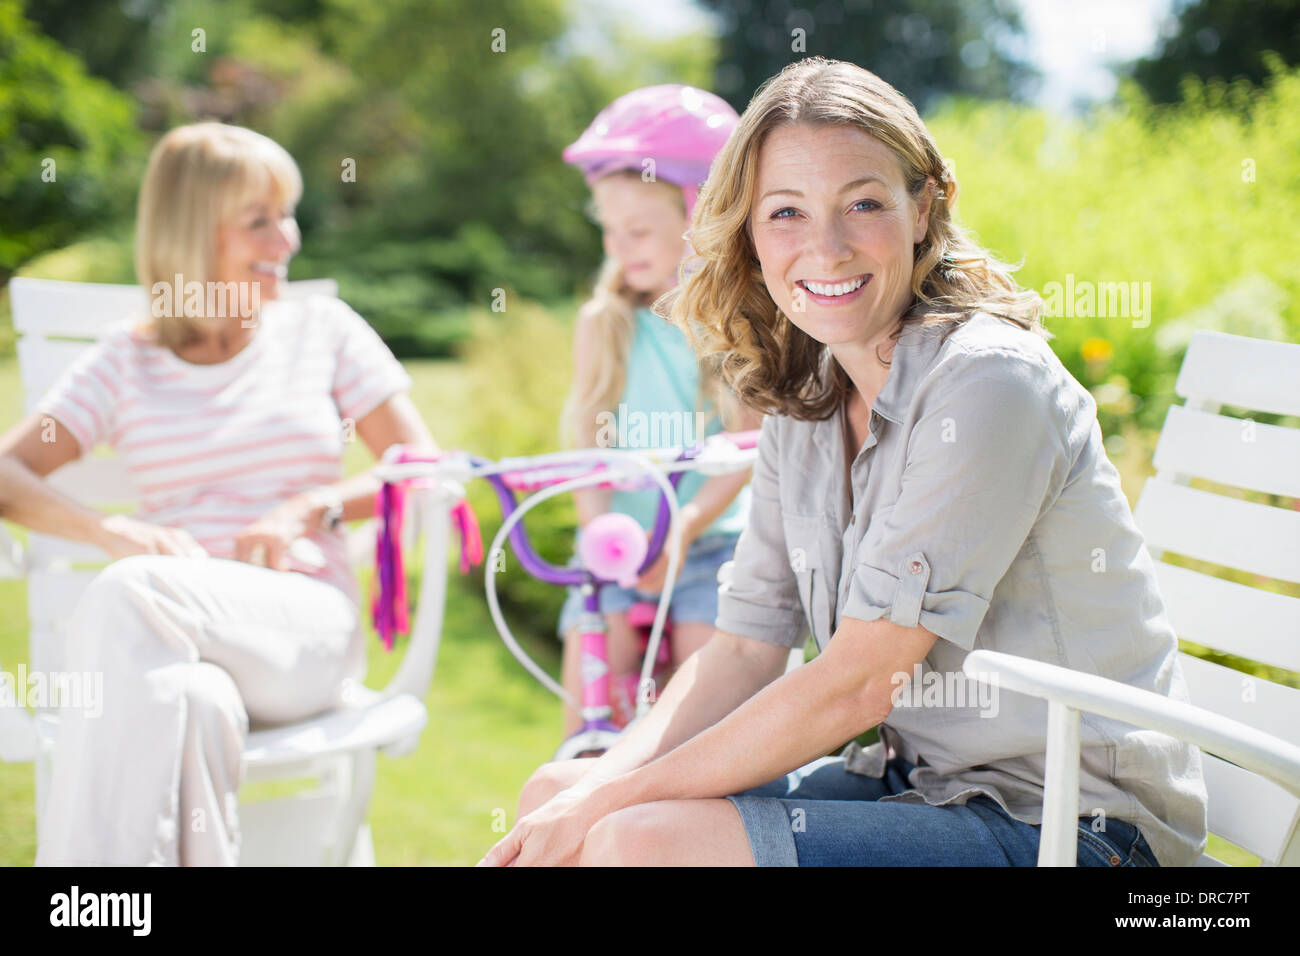 Woman smiling in backyard Banque D'Images